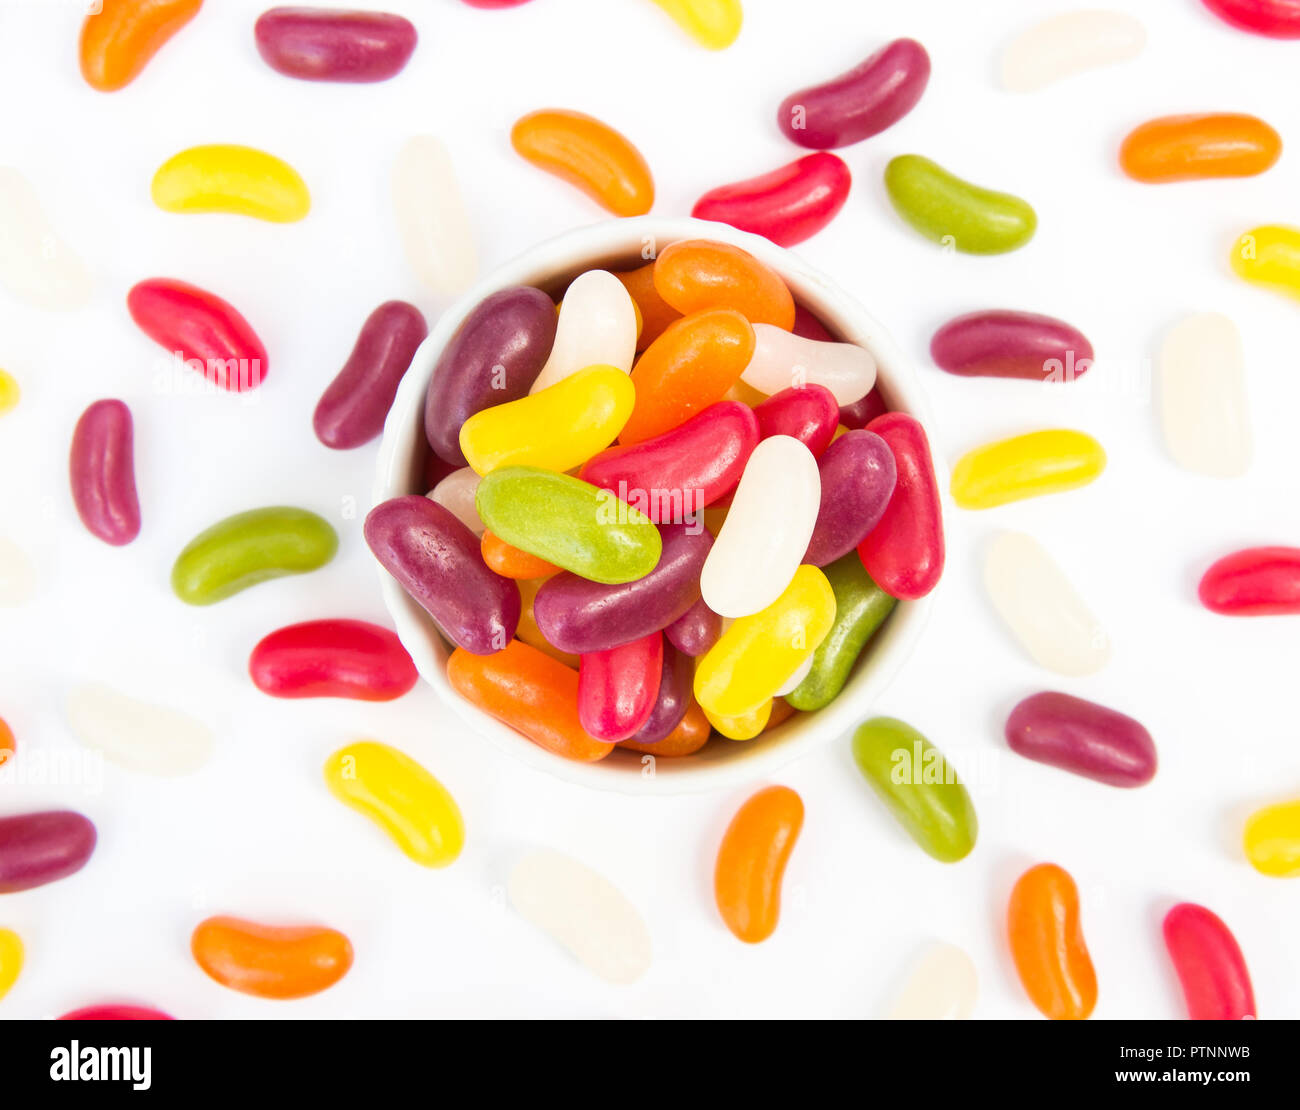 Looking down from above onto a bowl full of colourful jellybeans and candy scattered over a white background Stock Photo